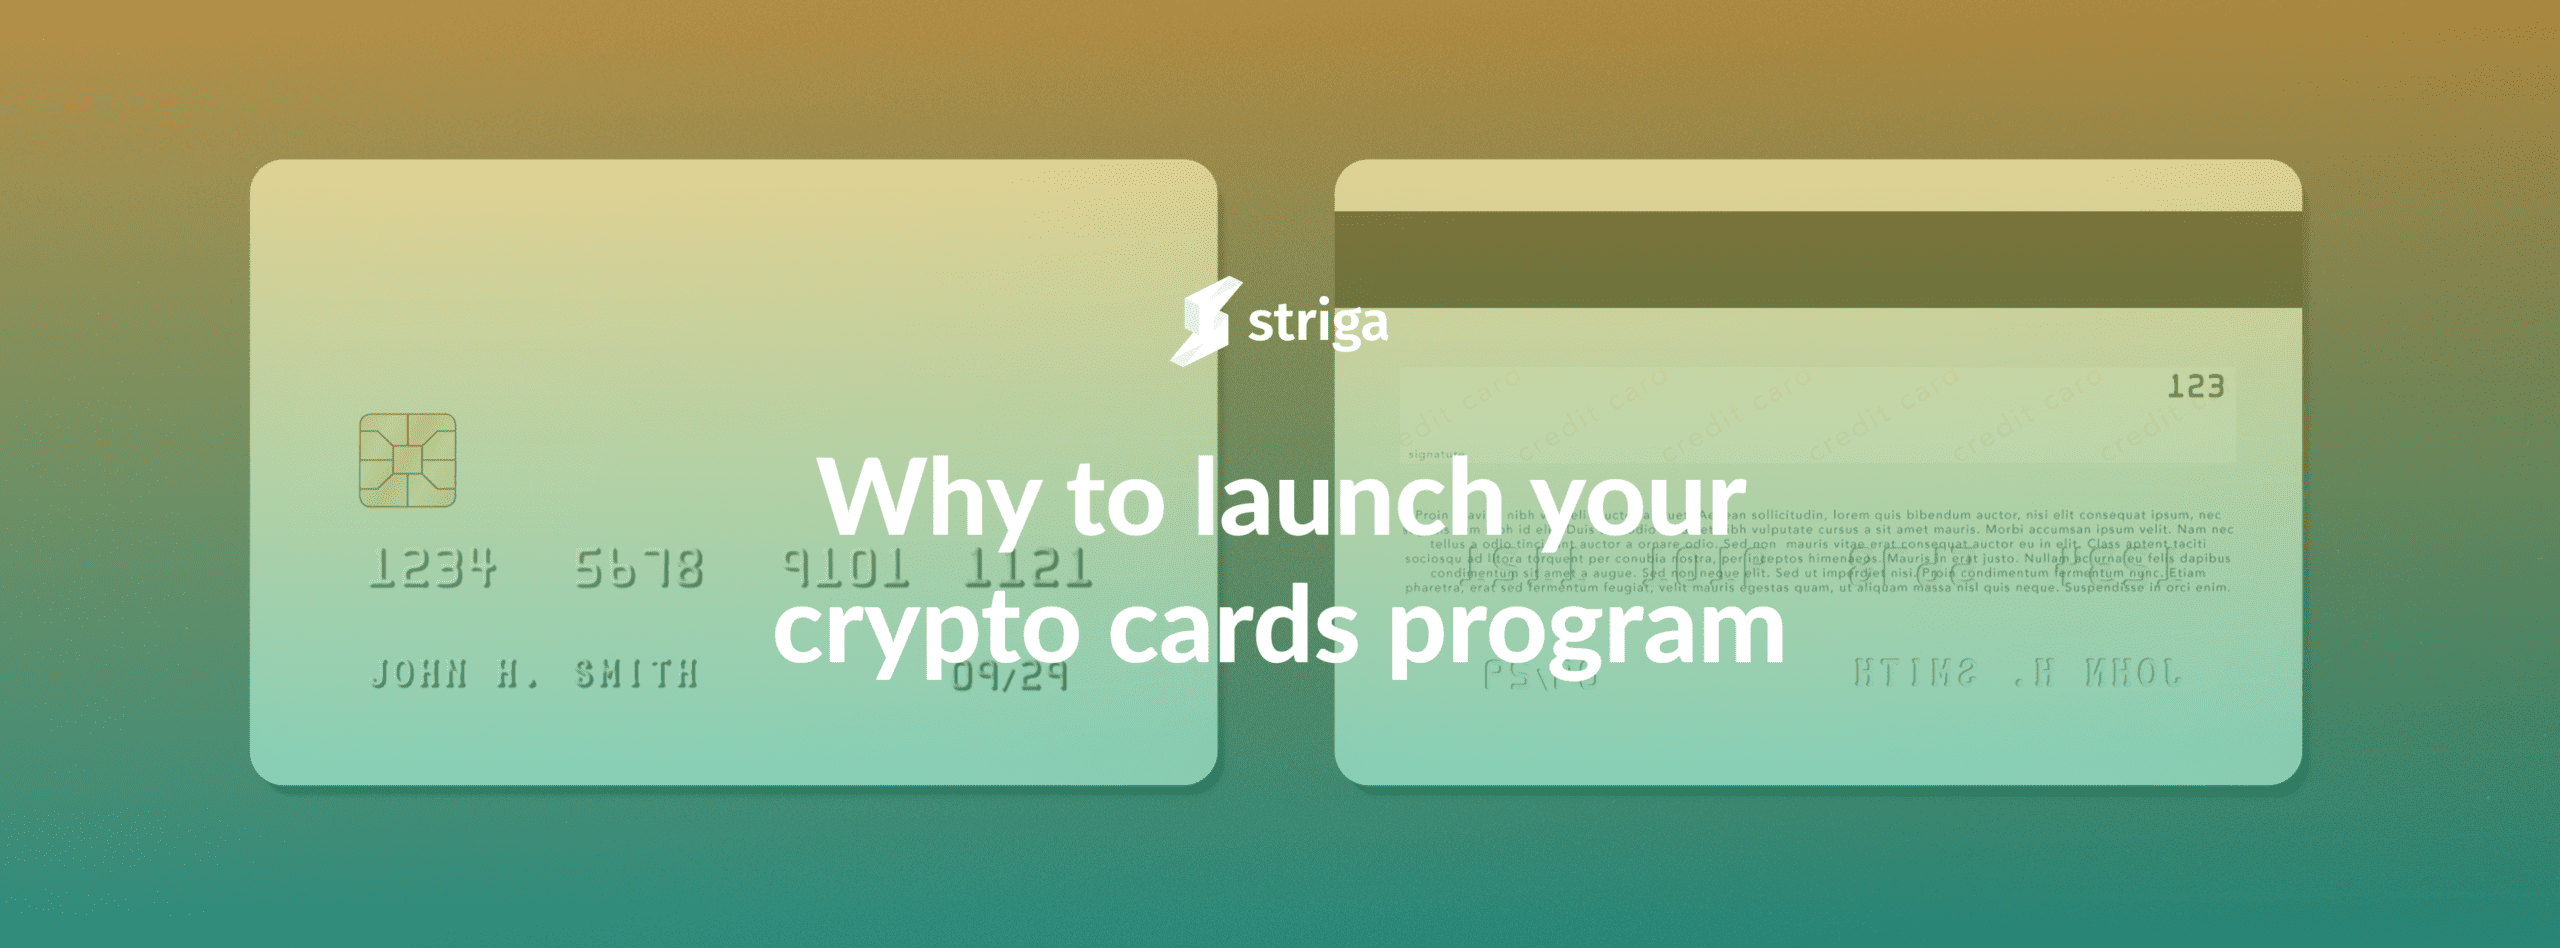 why-offer-crypto-cards-now-striga-crypto-native-banking-as-a-service